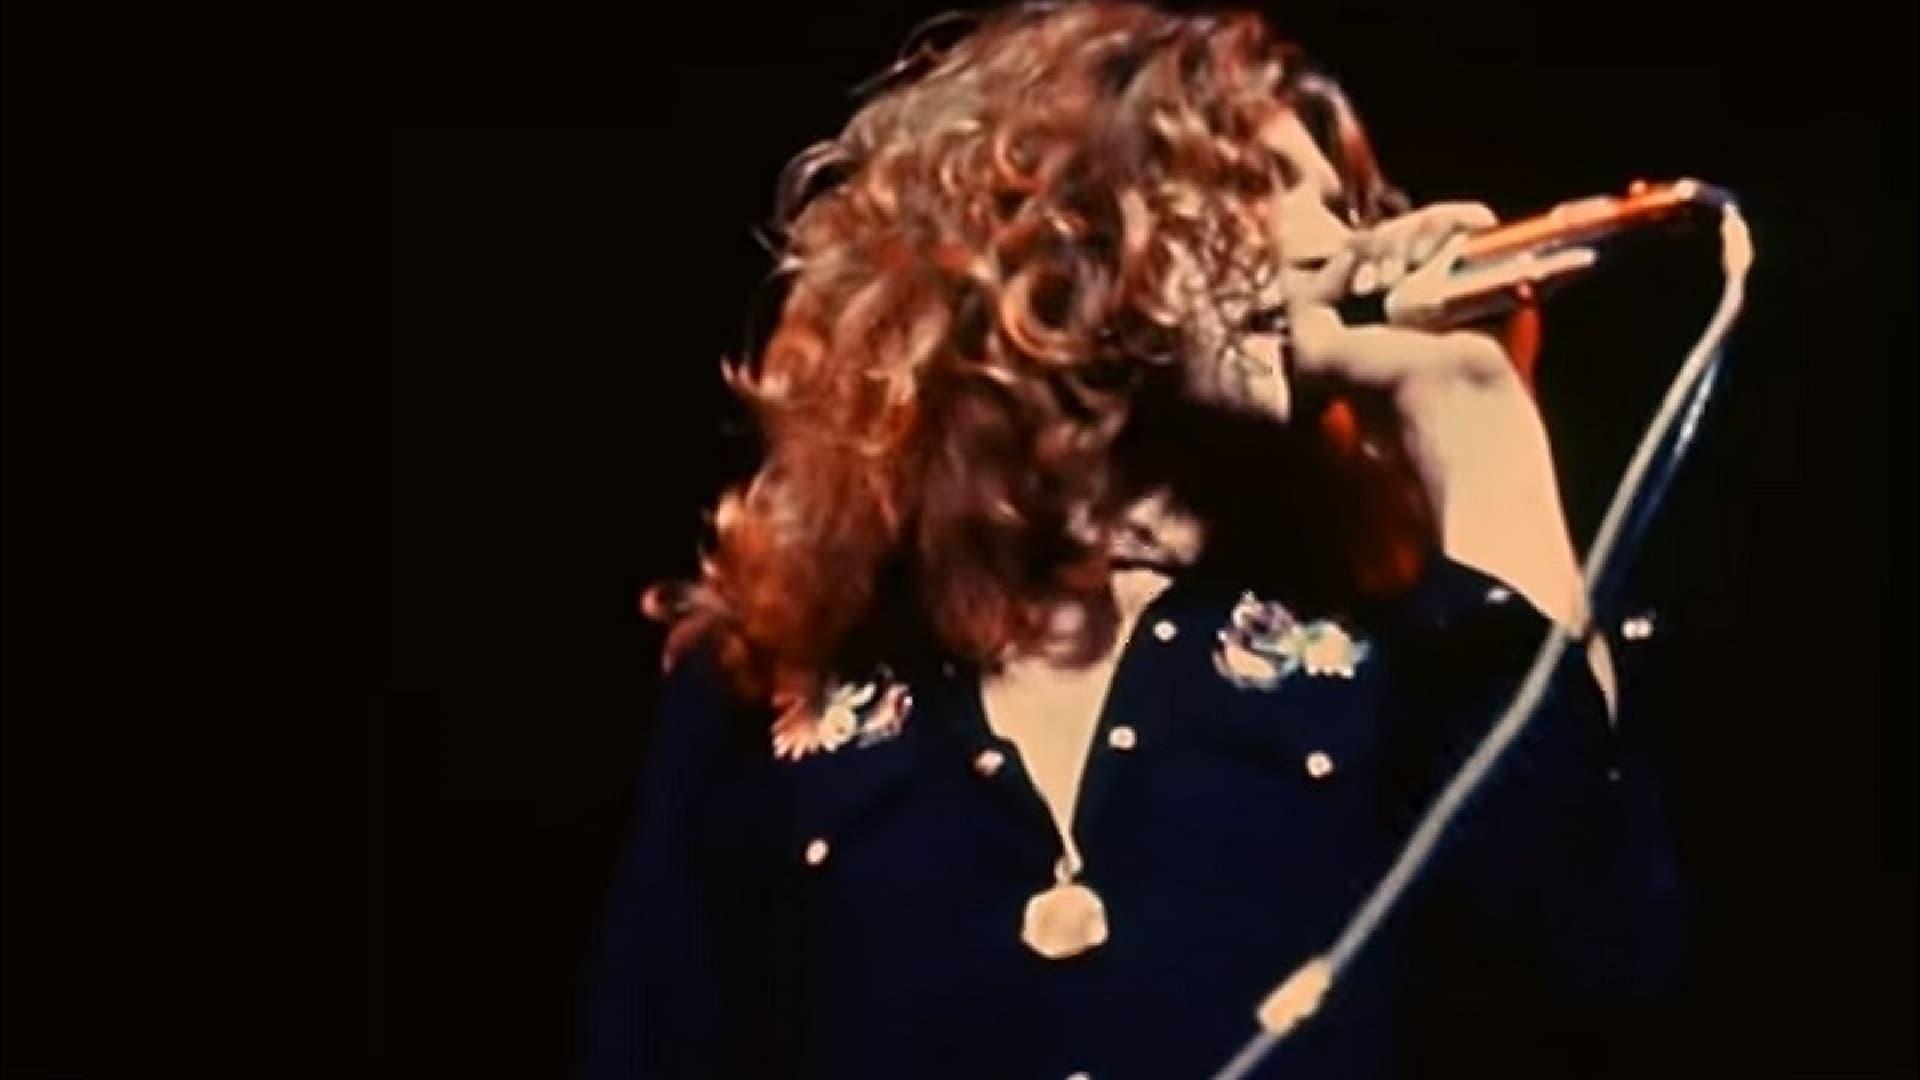 Led Zeppelin - Live at the Royal Albert Hall 1970 backdrop